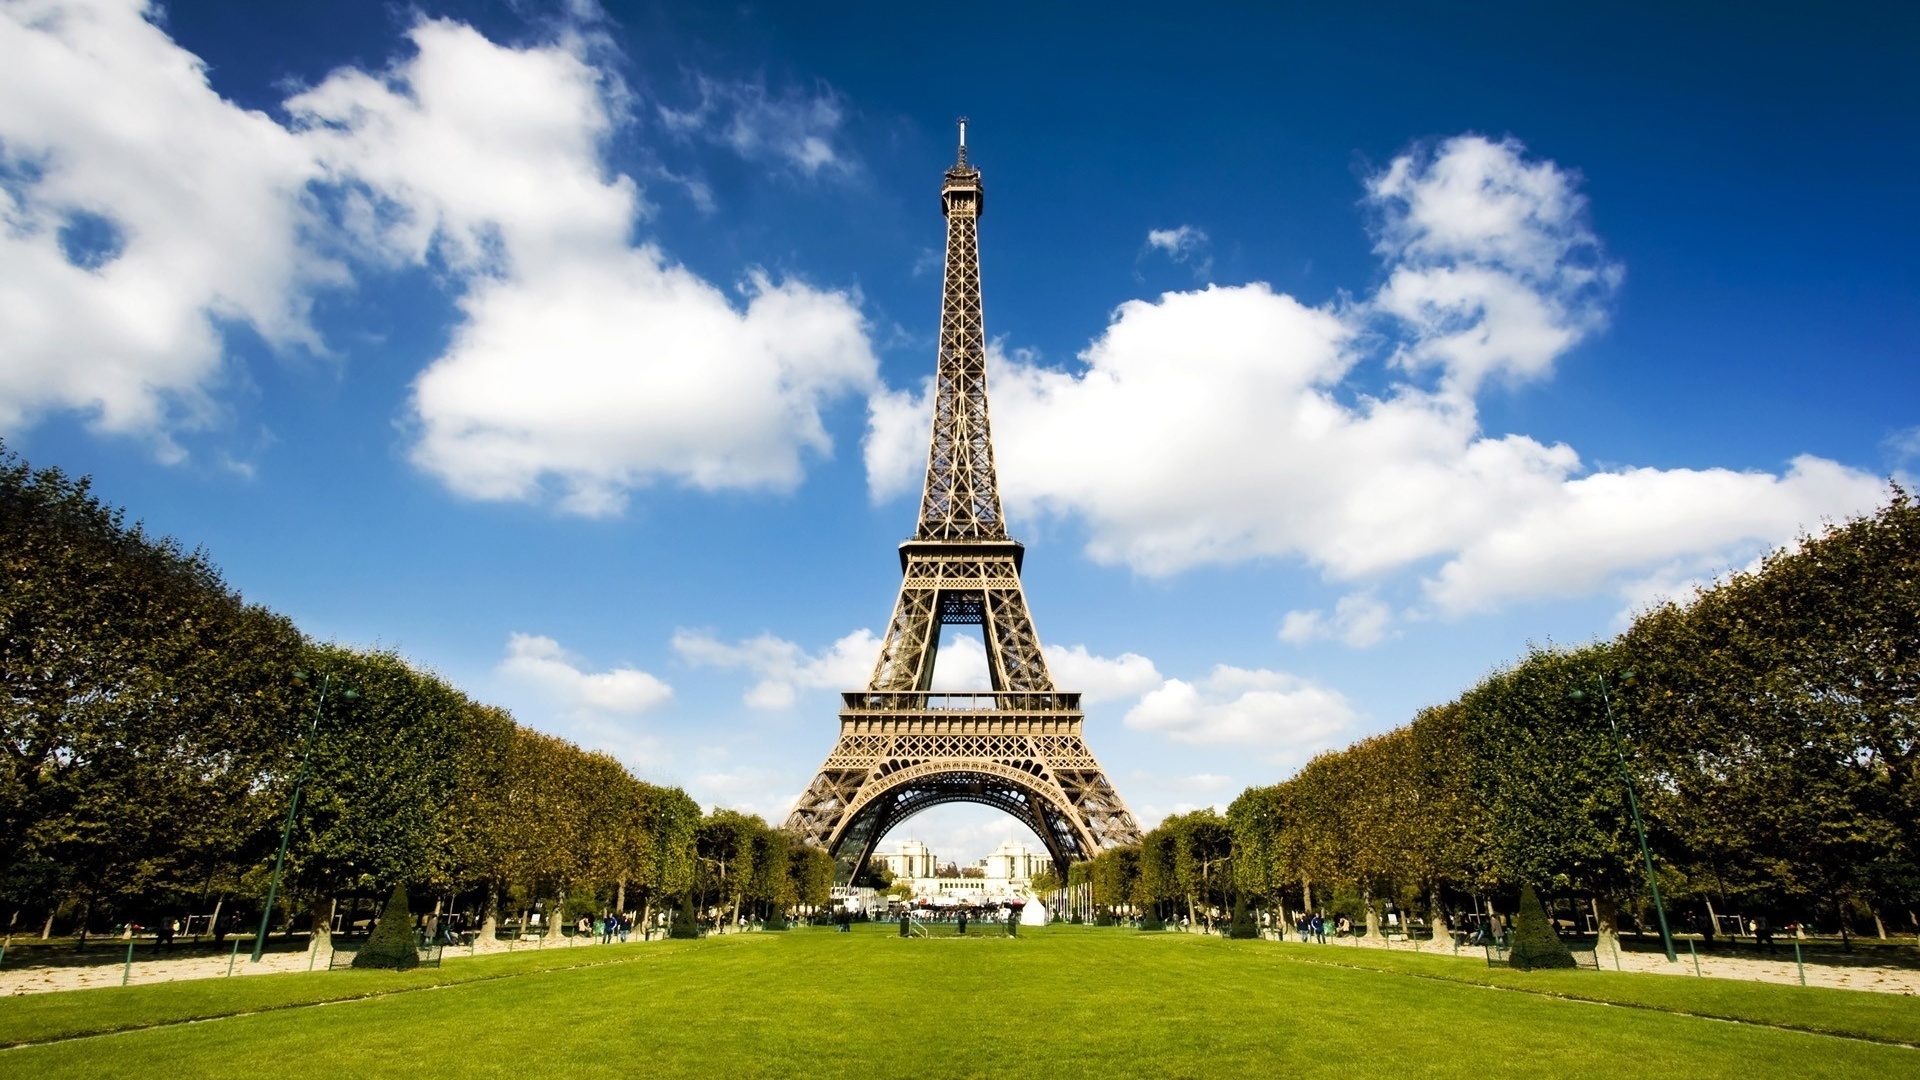 Paris full hd hdtv fhd 1080p wallpapers hd desktop backgrounds  1920x1080 images and pictures